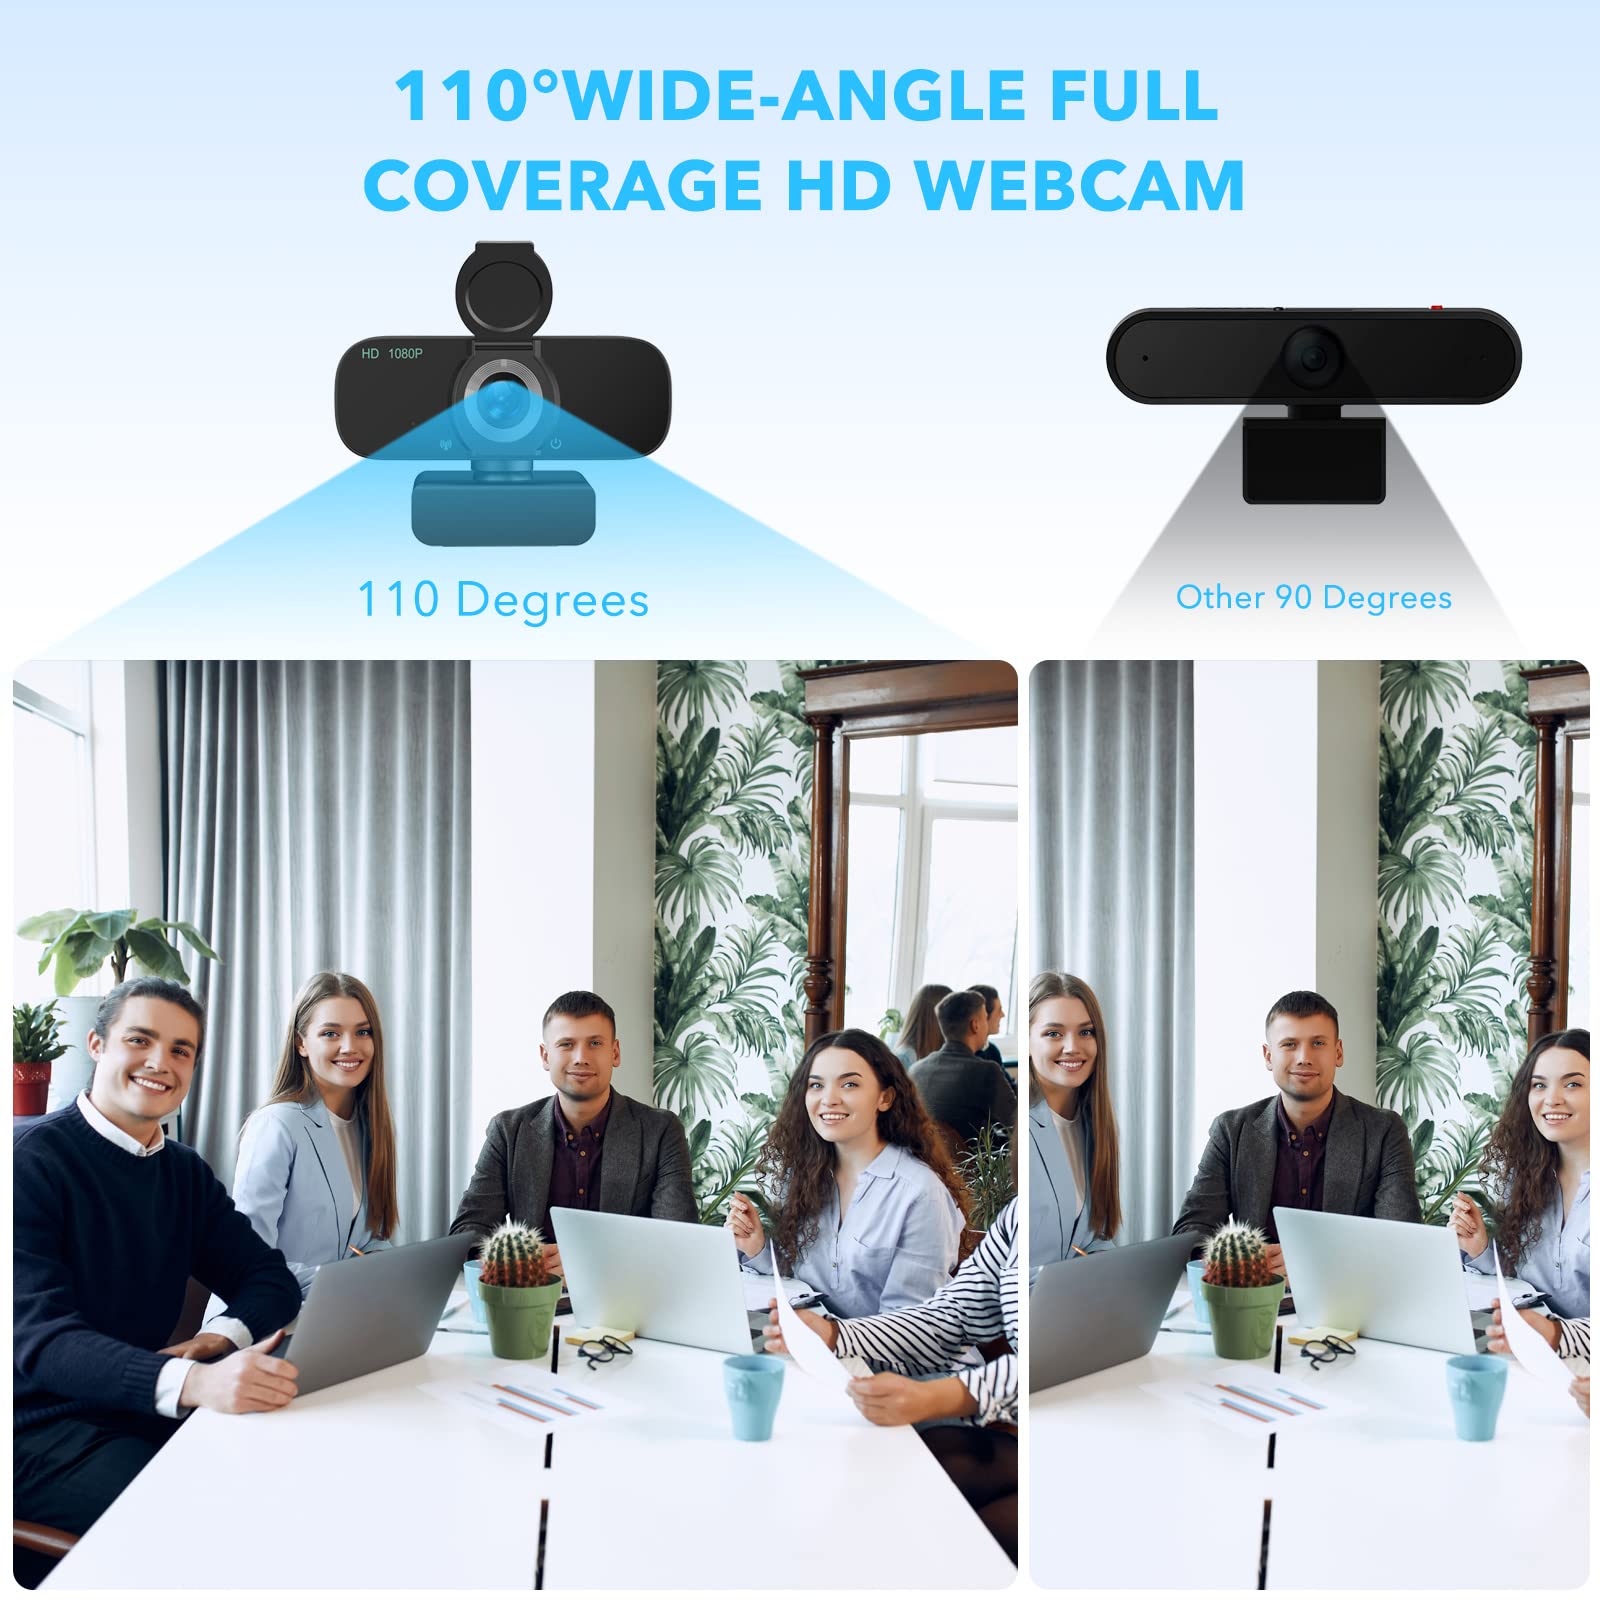 Annirose 1080P HD Webcam with Microphone, USB PC Computer Web Cam with Triopod Stand, Laptop Desktop Full HD Camera Video Webcam, Pro Streaming Webcam for Recording, Calling, Meeting, Gaming